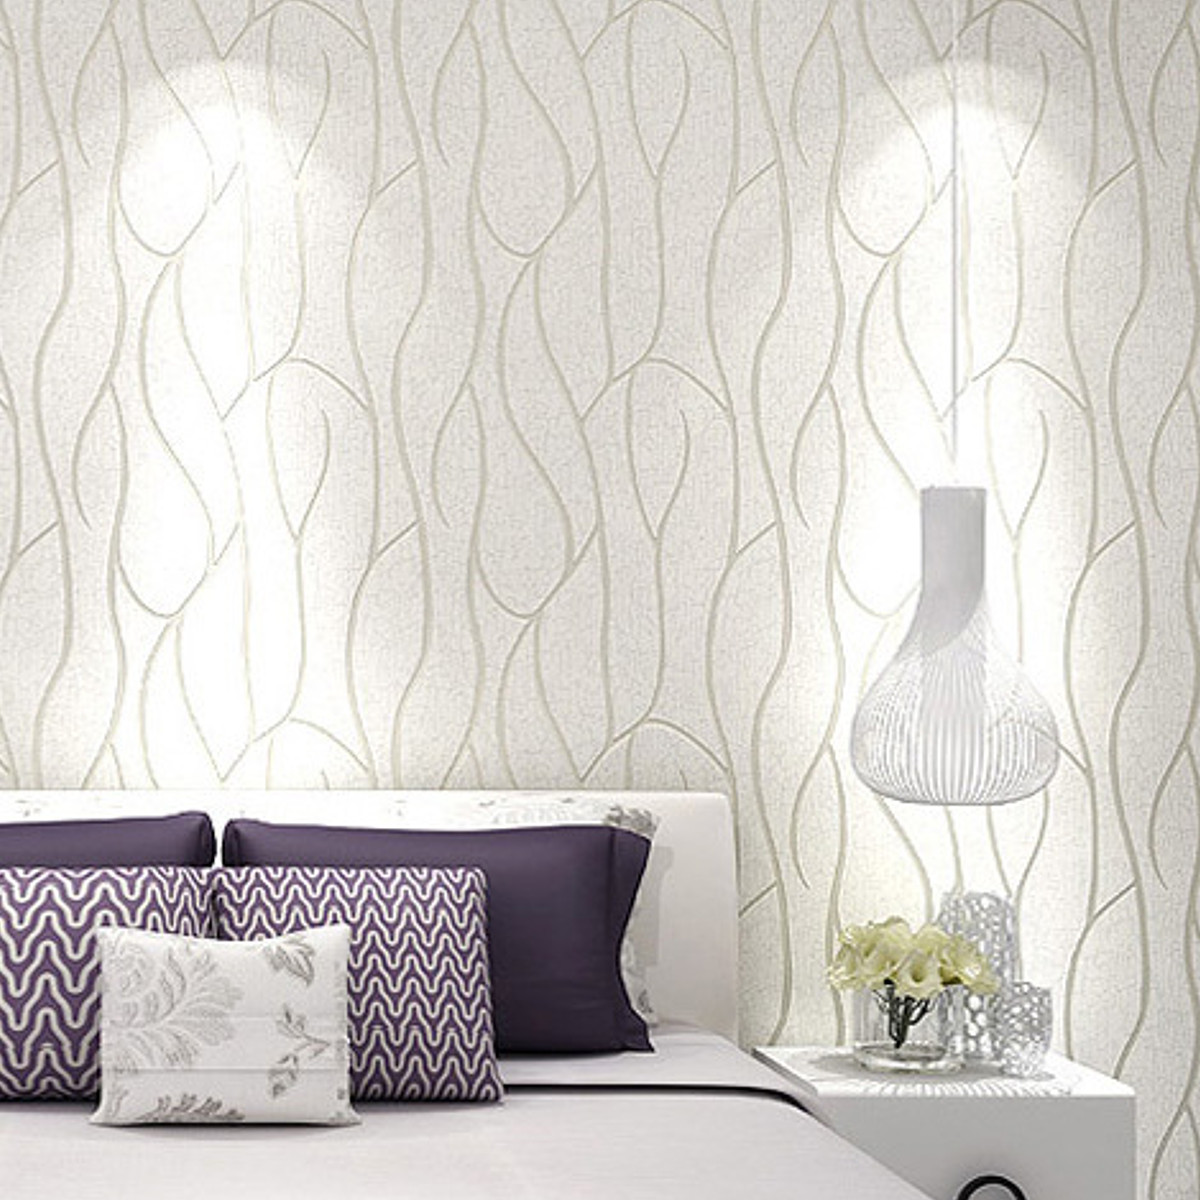 10M-3D-Non-woven-Wave-Stripe-Embossed-paper-Rolls-Bedroom-Living-Room-Wall-Sticker-1604540-4